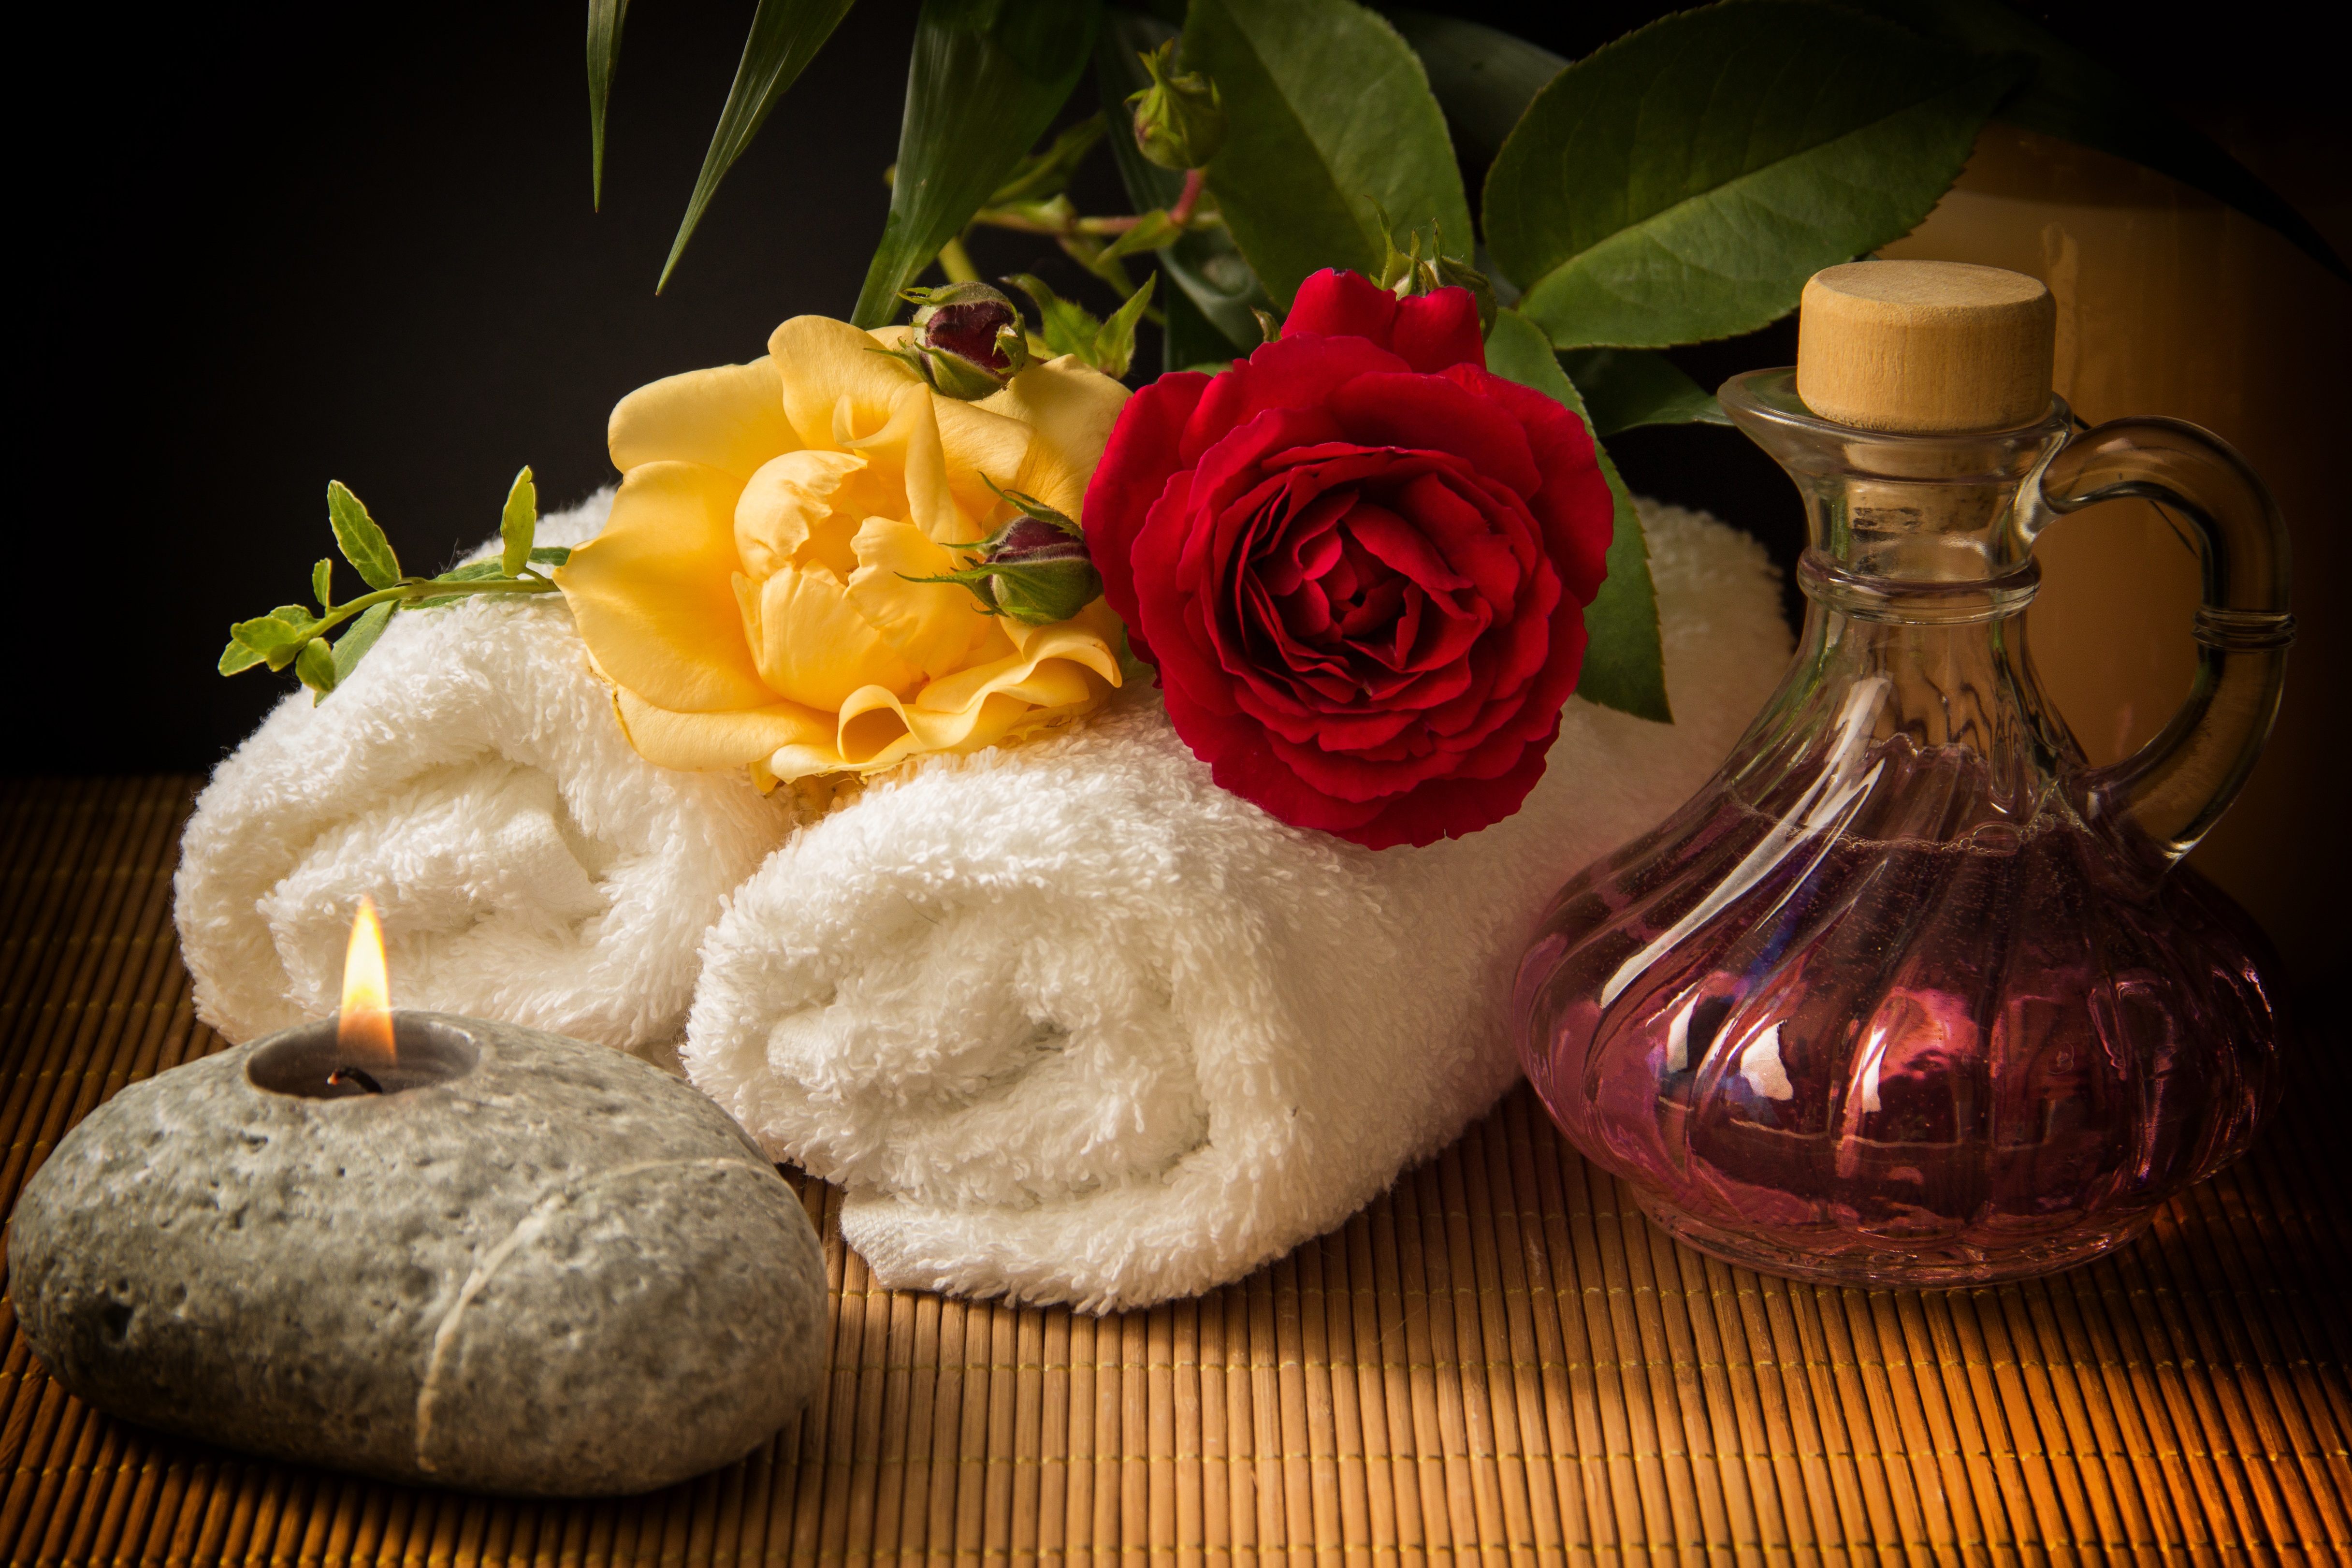 flower, man made, spa, candle, red rose, rose, still life, towel